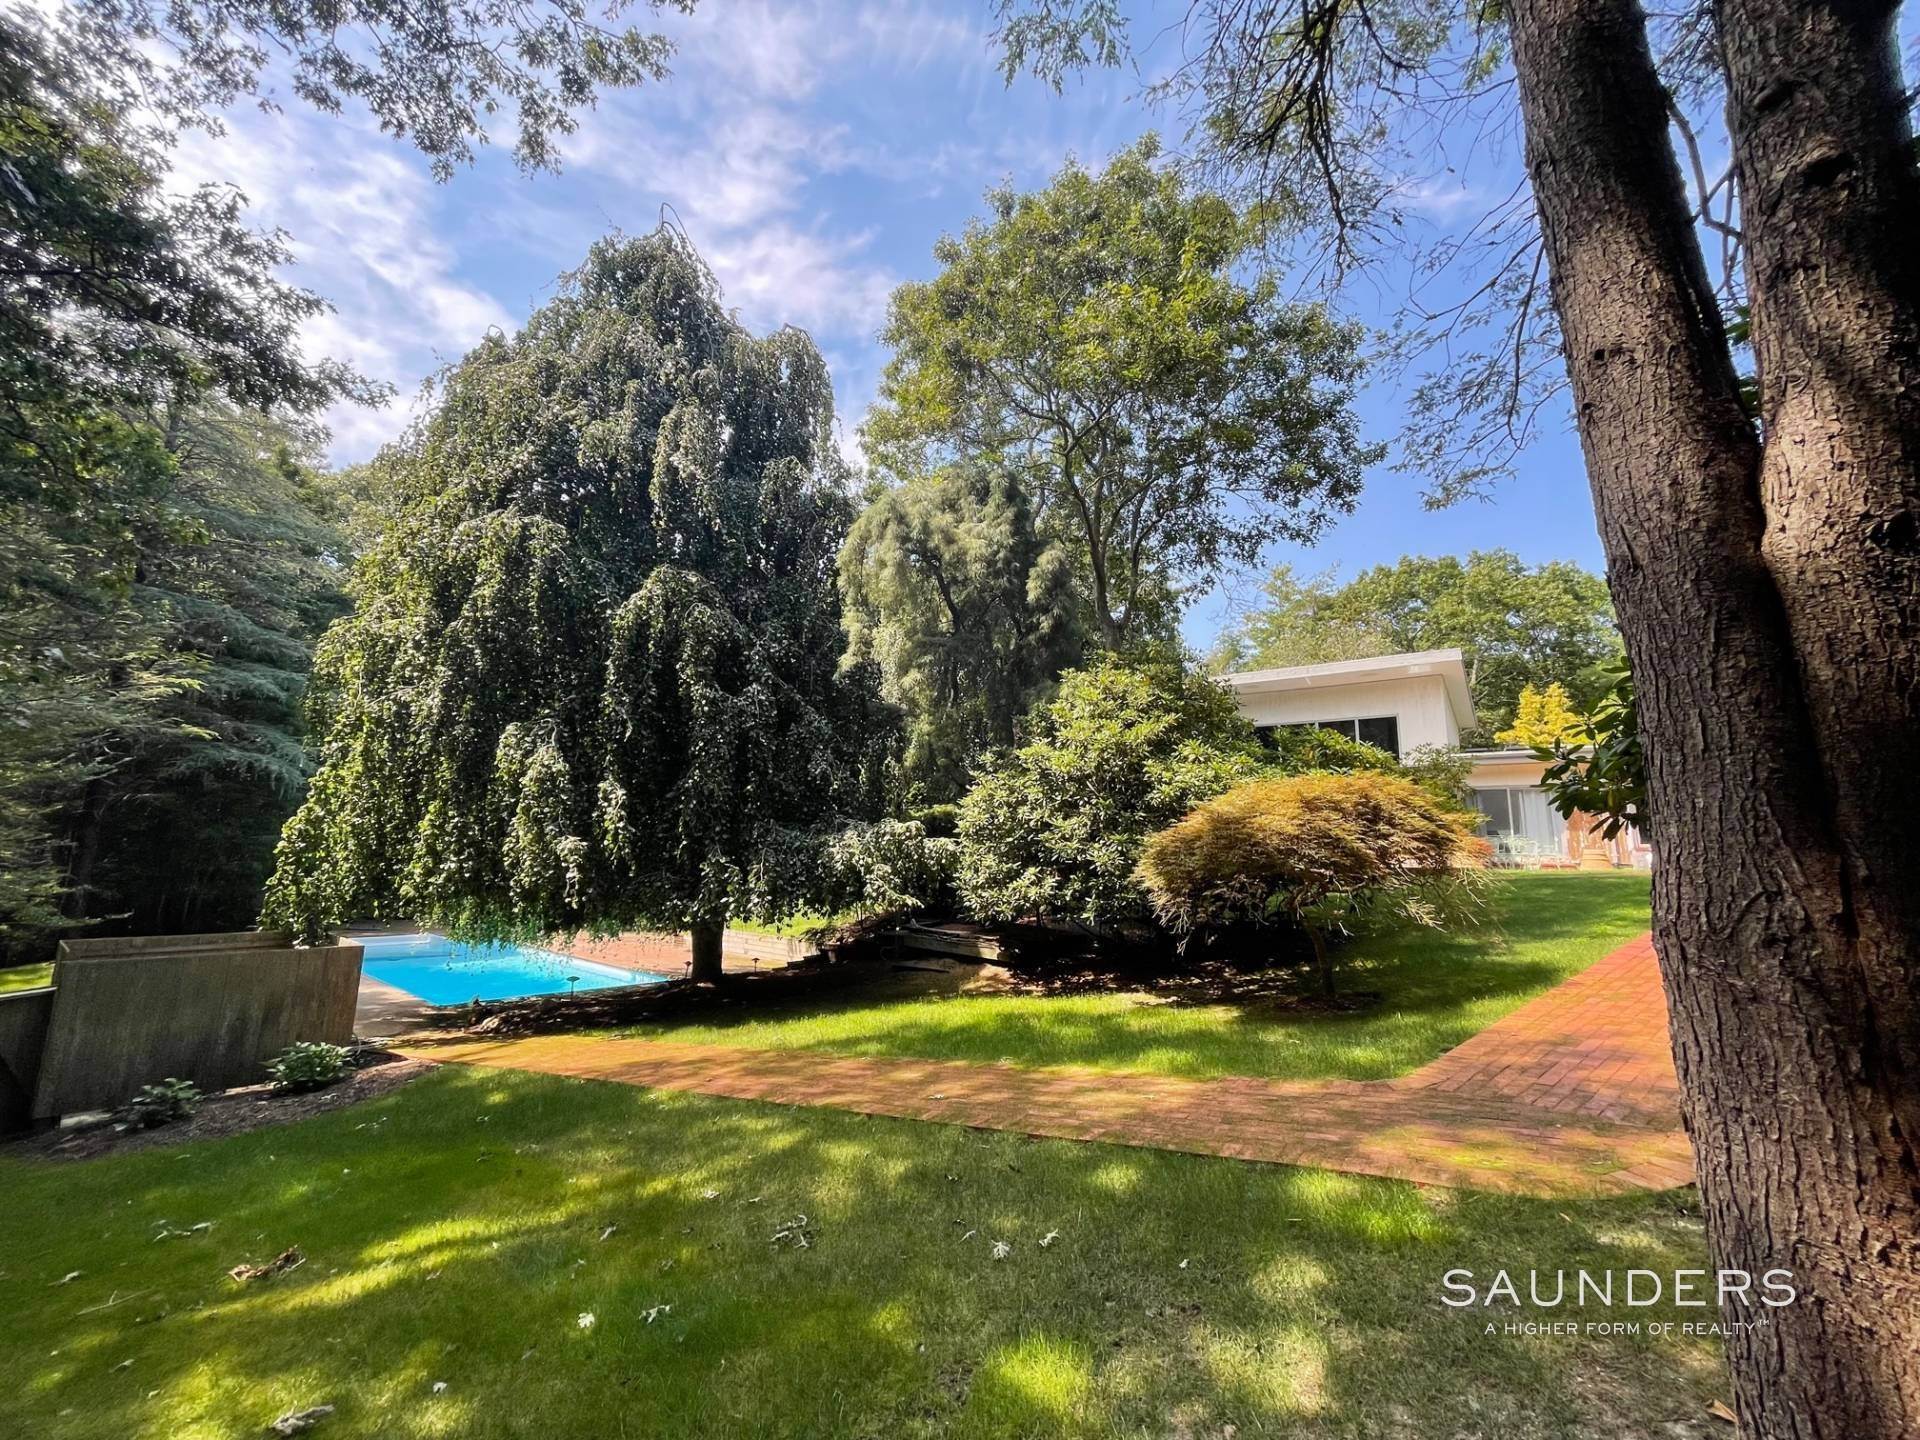 Single Family Homes for Sale at Clean Modern Lines, Preserve Adjacent, Grandfathered Clearing 12 Marion Lane, East Hampton, NY 11937